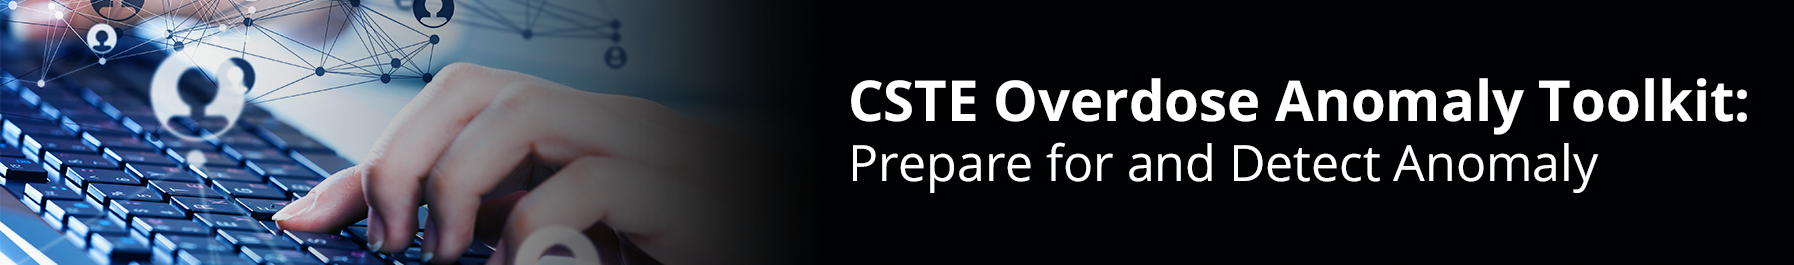 CSTE Overdose Anomaly Toolkit: Prepare and Detect Anomaly